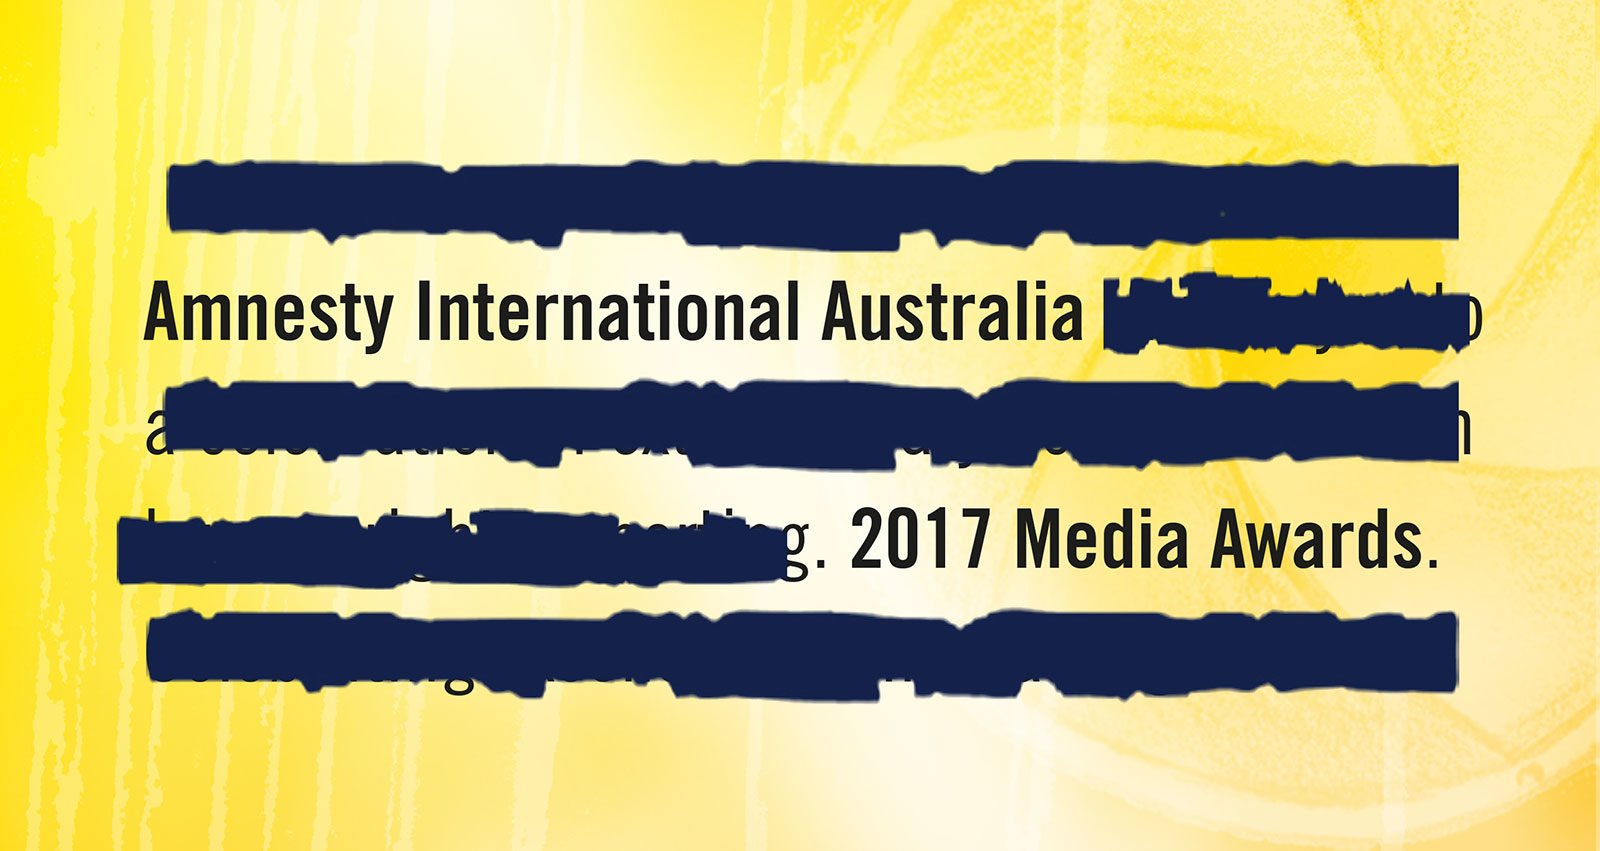 Heavily redacted black text on a yellow background. The visible text reads 'Amnesty International 2017 Media Awards